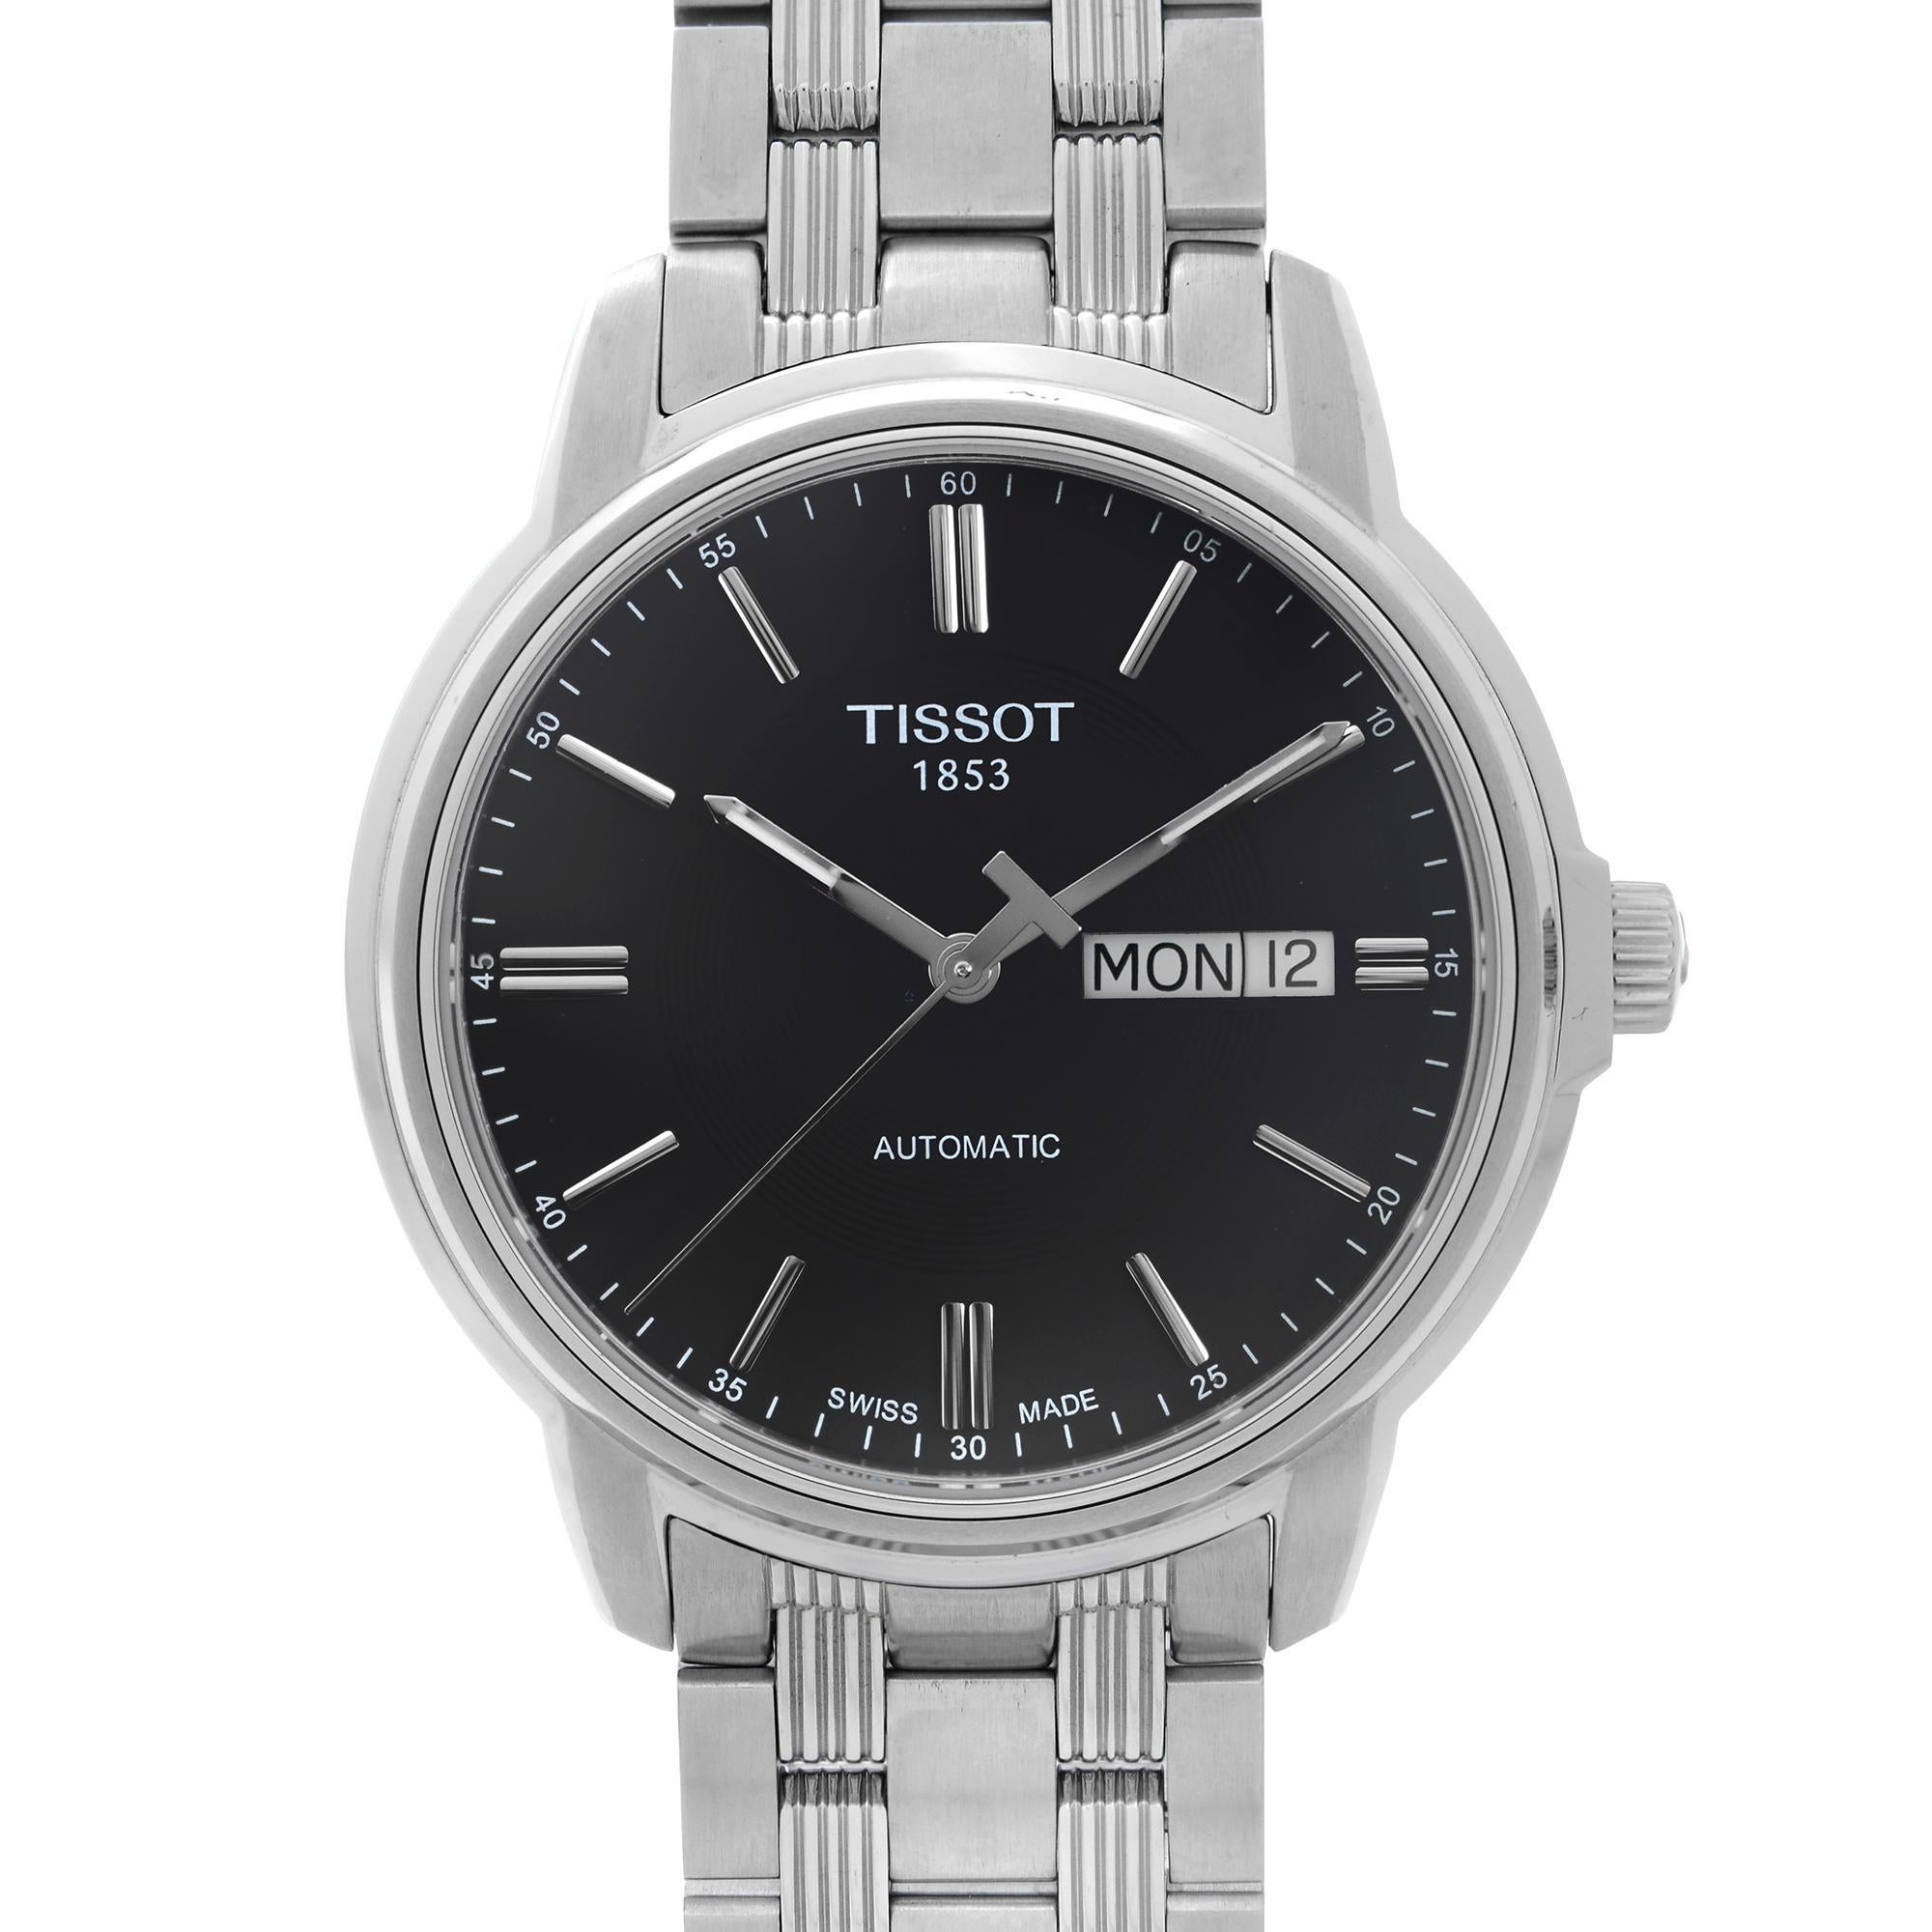 Display Model Tissot Automatics III Steel Day-Date Black Dial Mens Watch T065.430.11.051.00. This Beautiful Timepiece is Powered by a Mechanical (Automatic) Movement and Features: Stainless Steel Case and Bracelet. Fixed Stainless Steel Bezel. Black